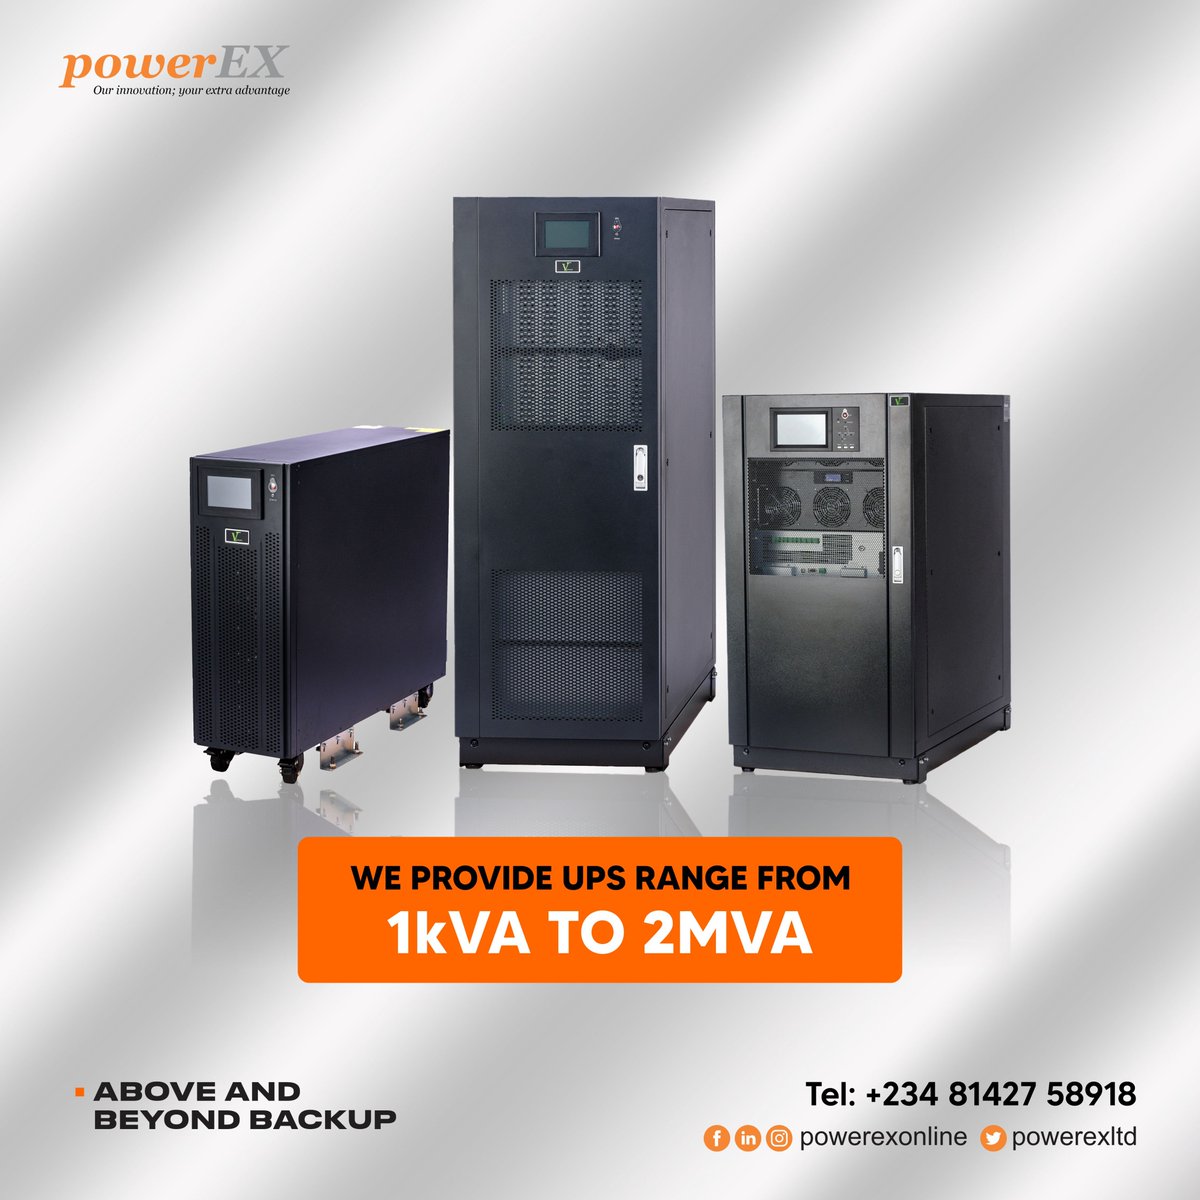 This is a friendly reminder that Powerex Limited is your go-to partner for all power engineering solutions.

Call/Whatsapp: 08142758920; 08146757460; 08142758926

#powerex #powersolution #power #solutions #solutionsprovider #backup #powerbackup #ups #avr #lagos #nigeria